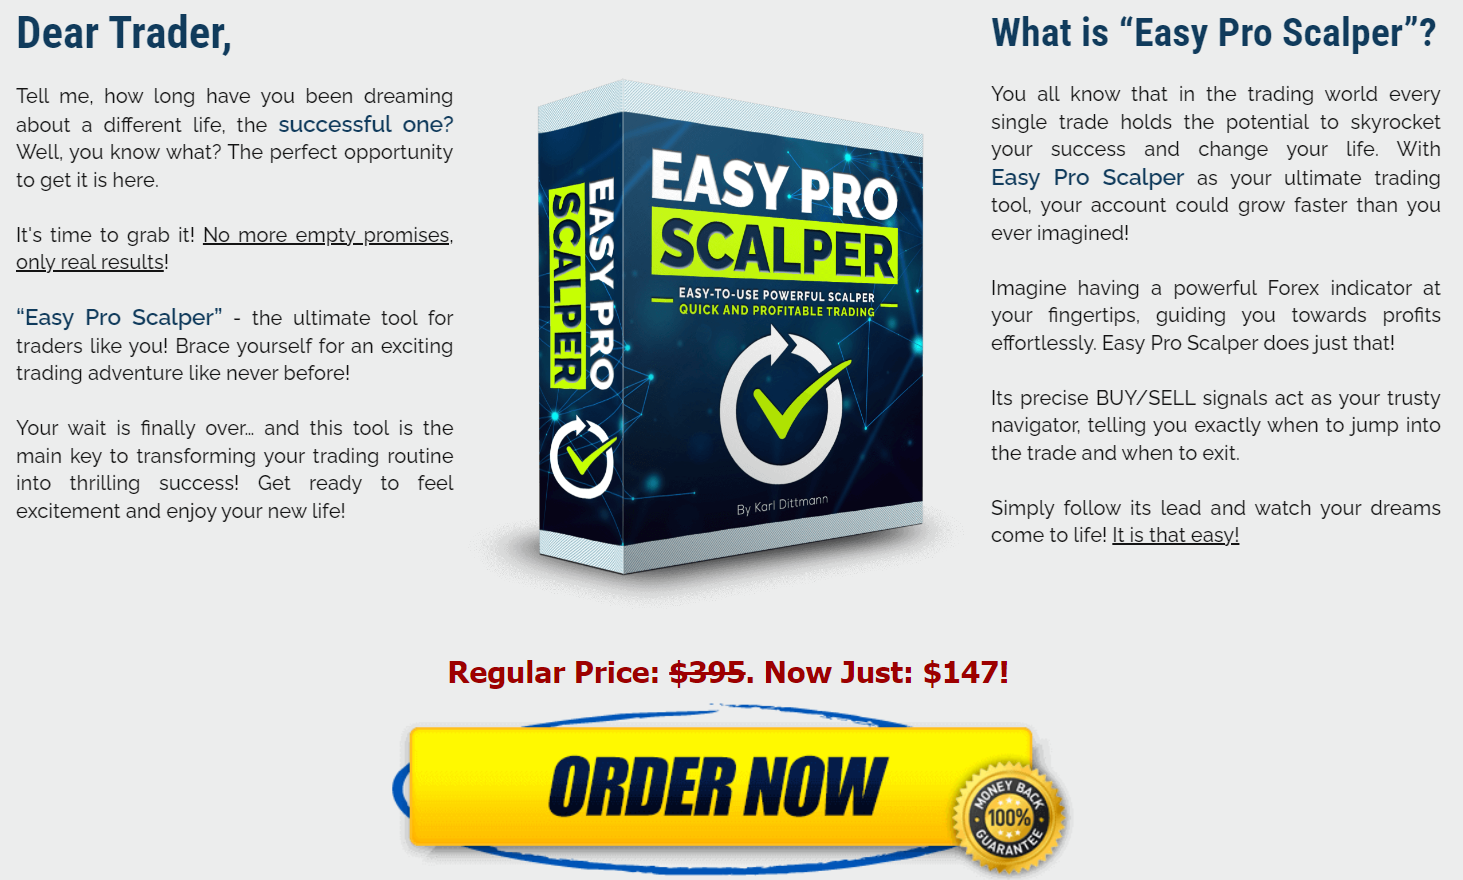 highly converting forex product,easy pro scalper - highly converting forex product,easy pro scalper review,easy pro scalper indicator,easy pro scalper,forex trading,forex,high converting forex product,easy pro scalper reviews,highly converting forex,easy pro scalper forex indicator,easy pro scalper - highly converting forex product*net per sale,easy pro scalper indicator review,easy pro scalper karl dittmann,forex scalping